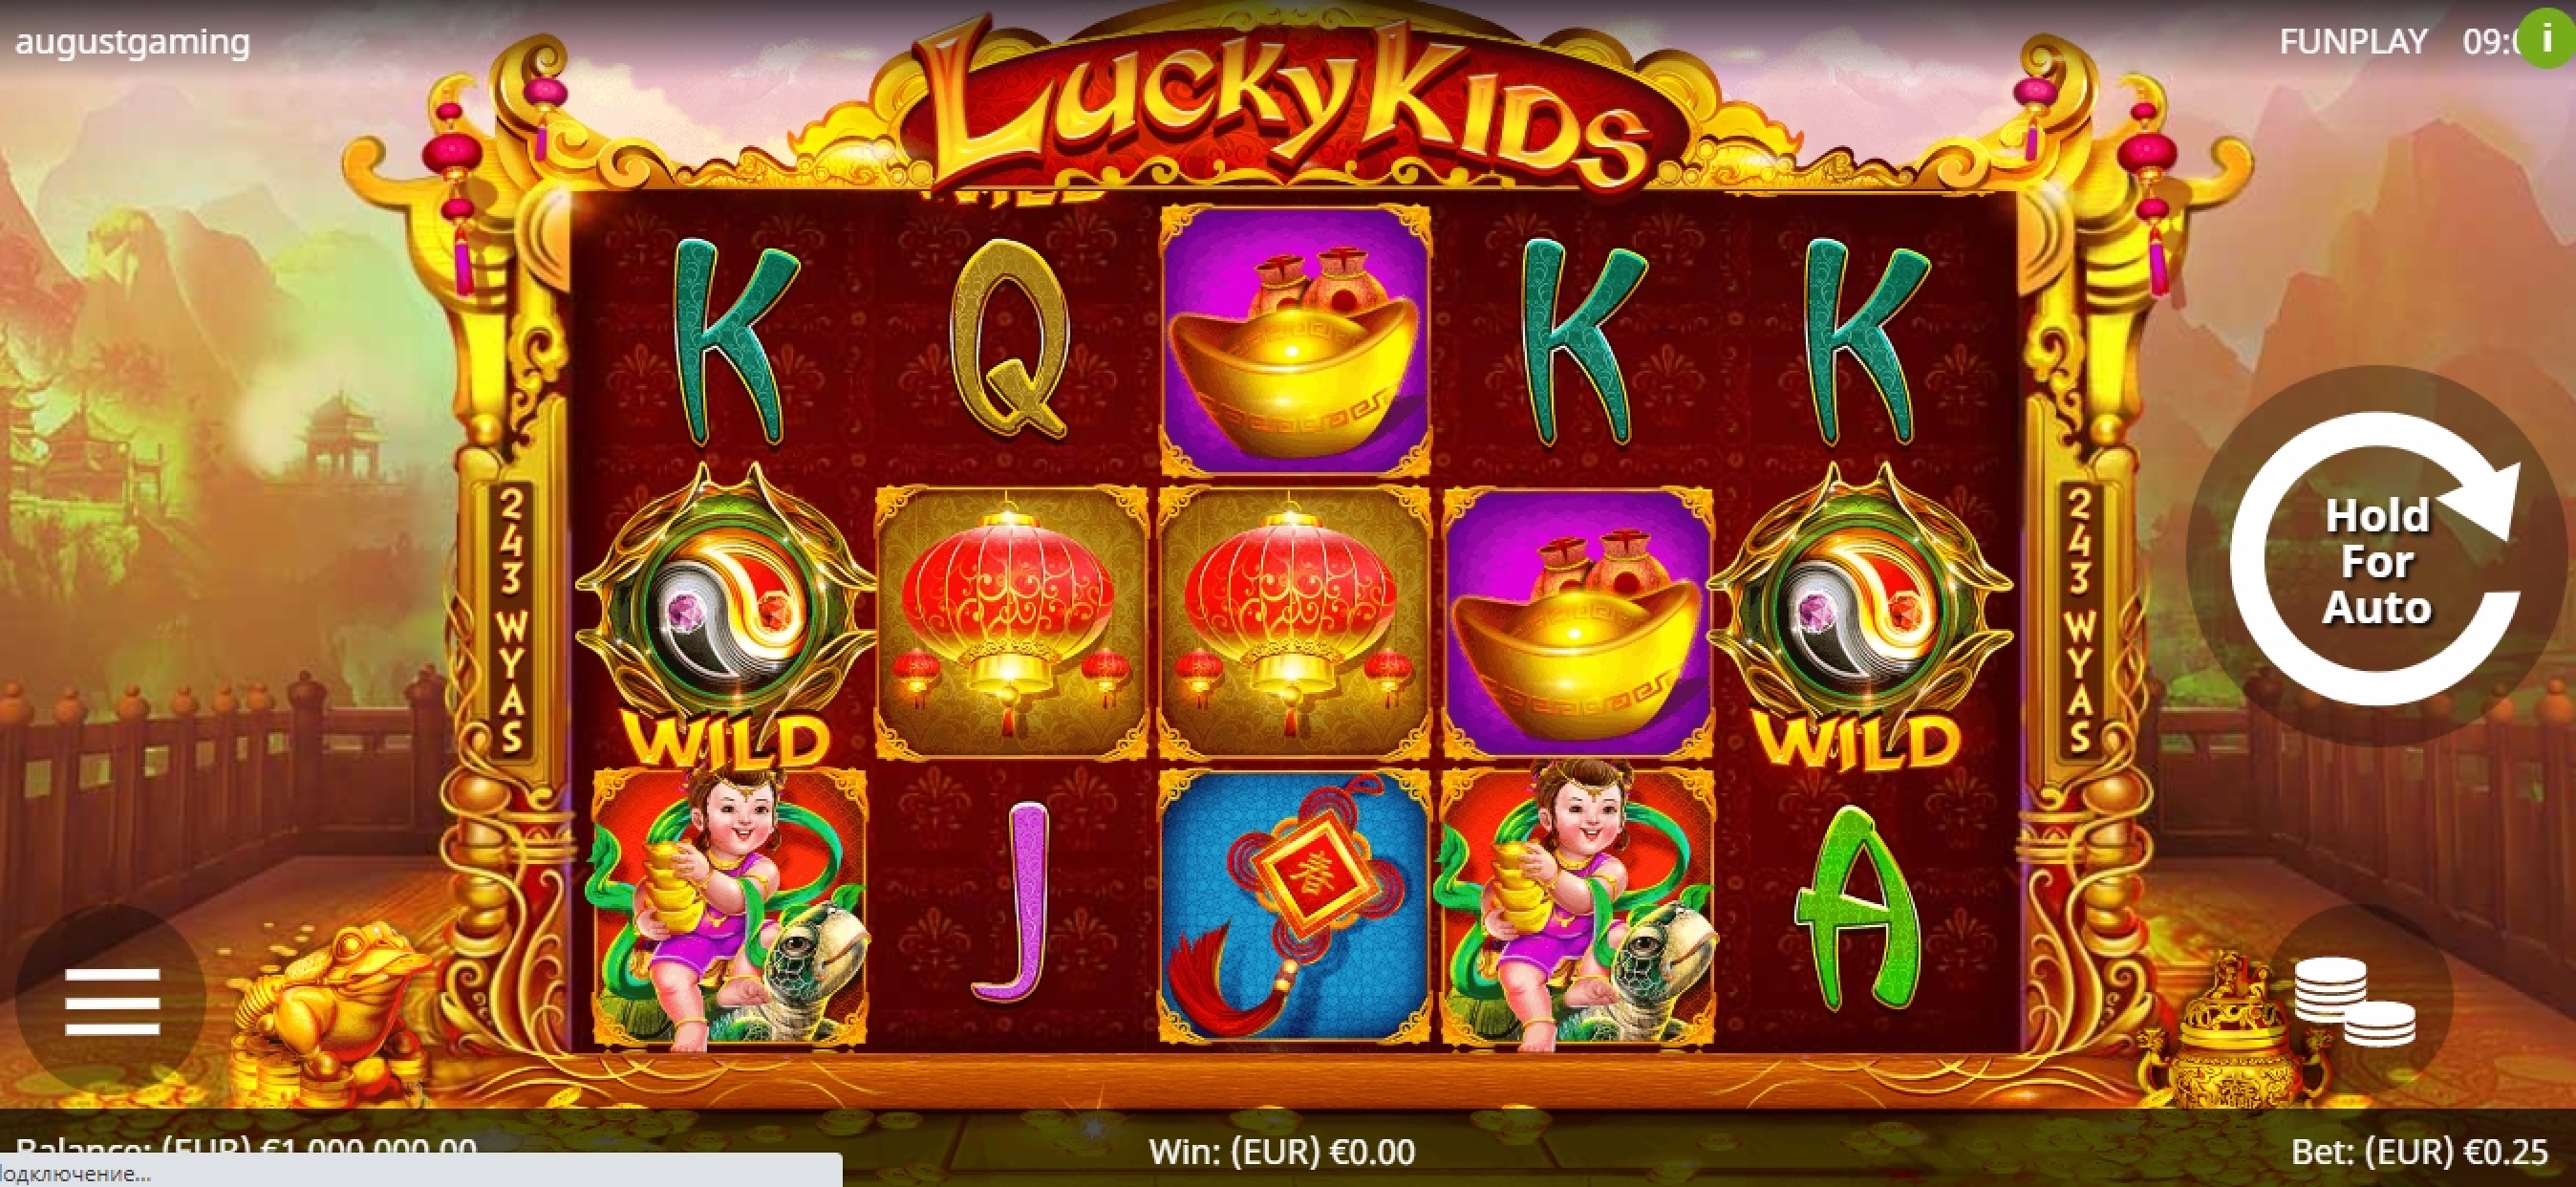 Reels in Lucky Kids Slot Game by August Gaming